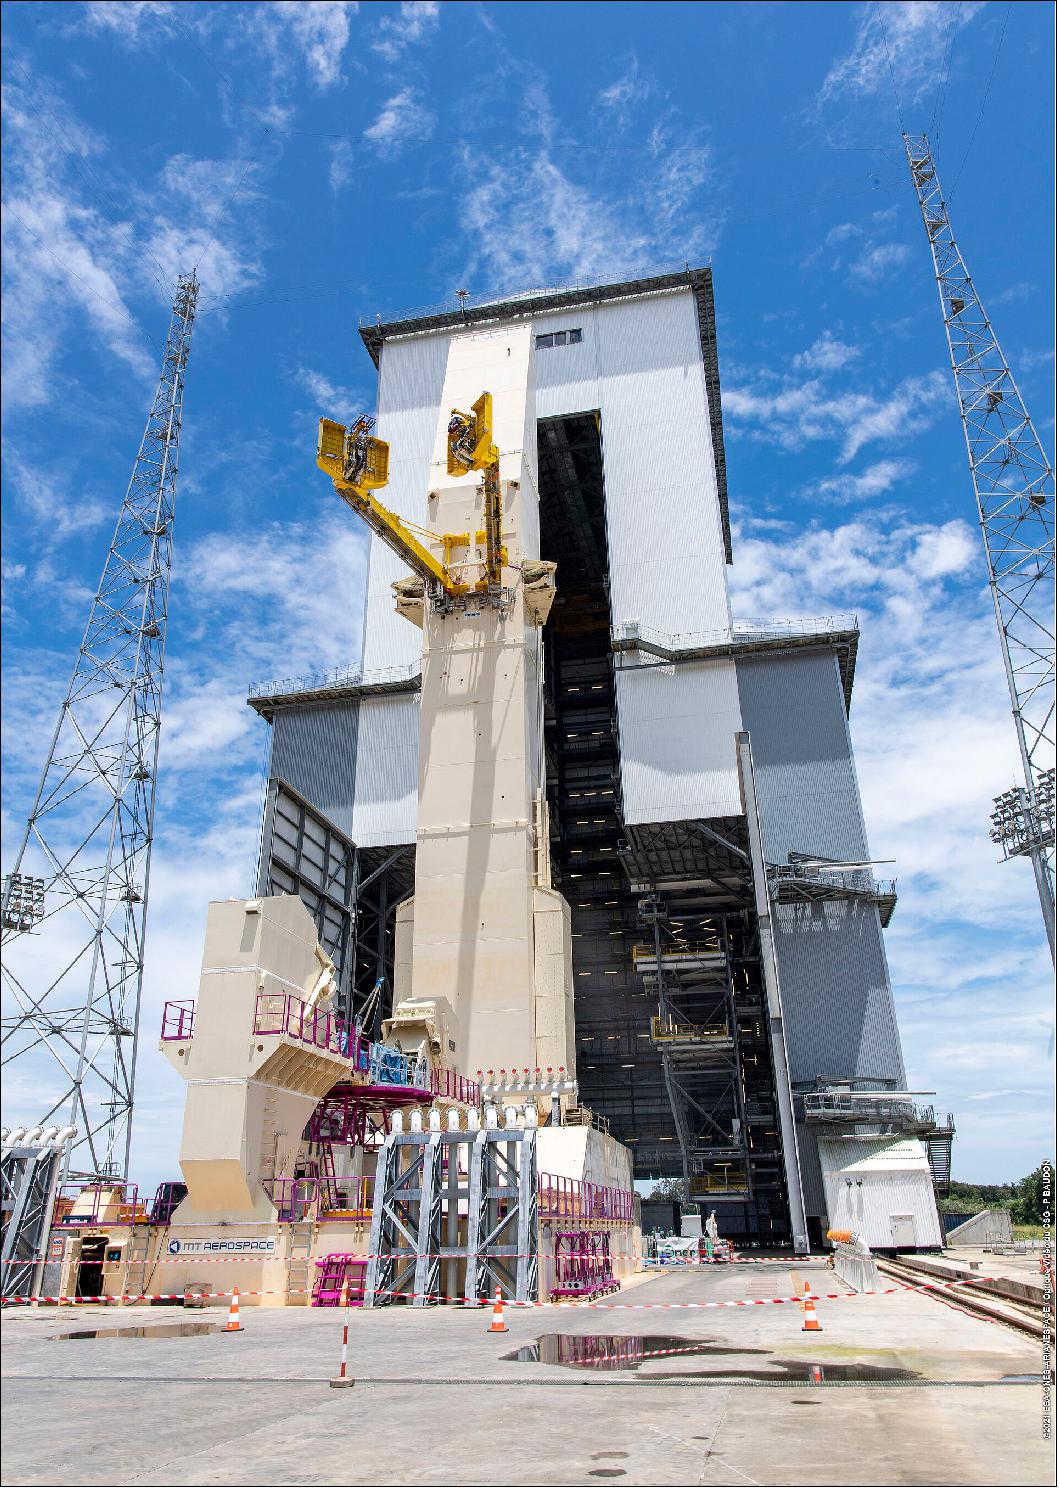 Figure 26: On the launch pad, two ‘cryo-arms’ made and tested in France have been attached to the upper end of the mast. They are part of the fluidic connection system which connects to the Ariane 6 upper stage (image credit: ESA/CNES/Arianespace)